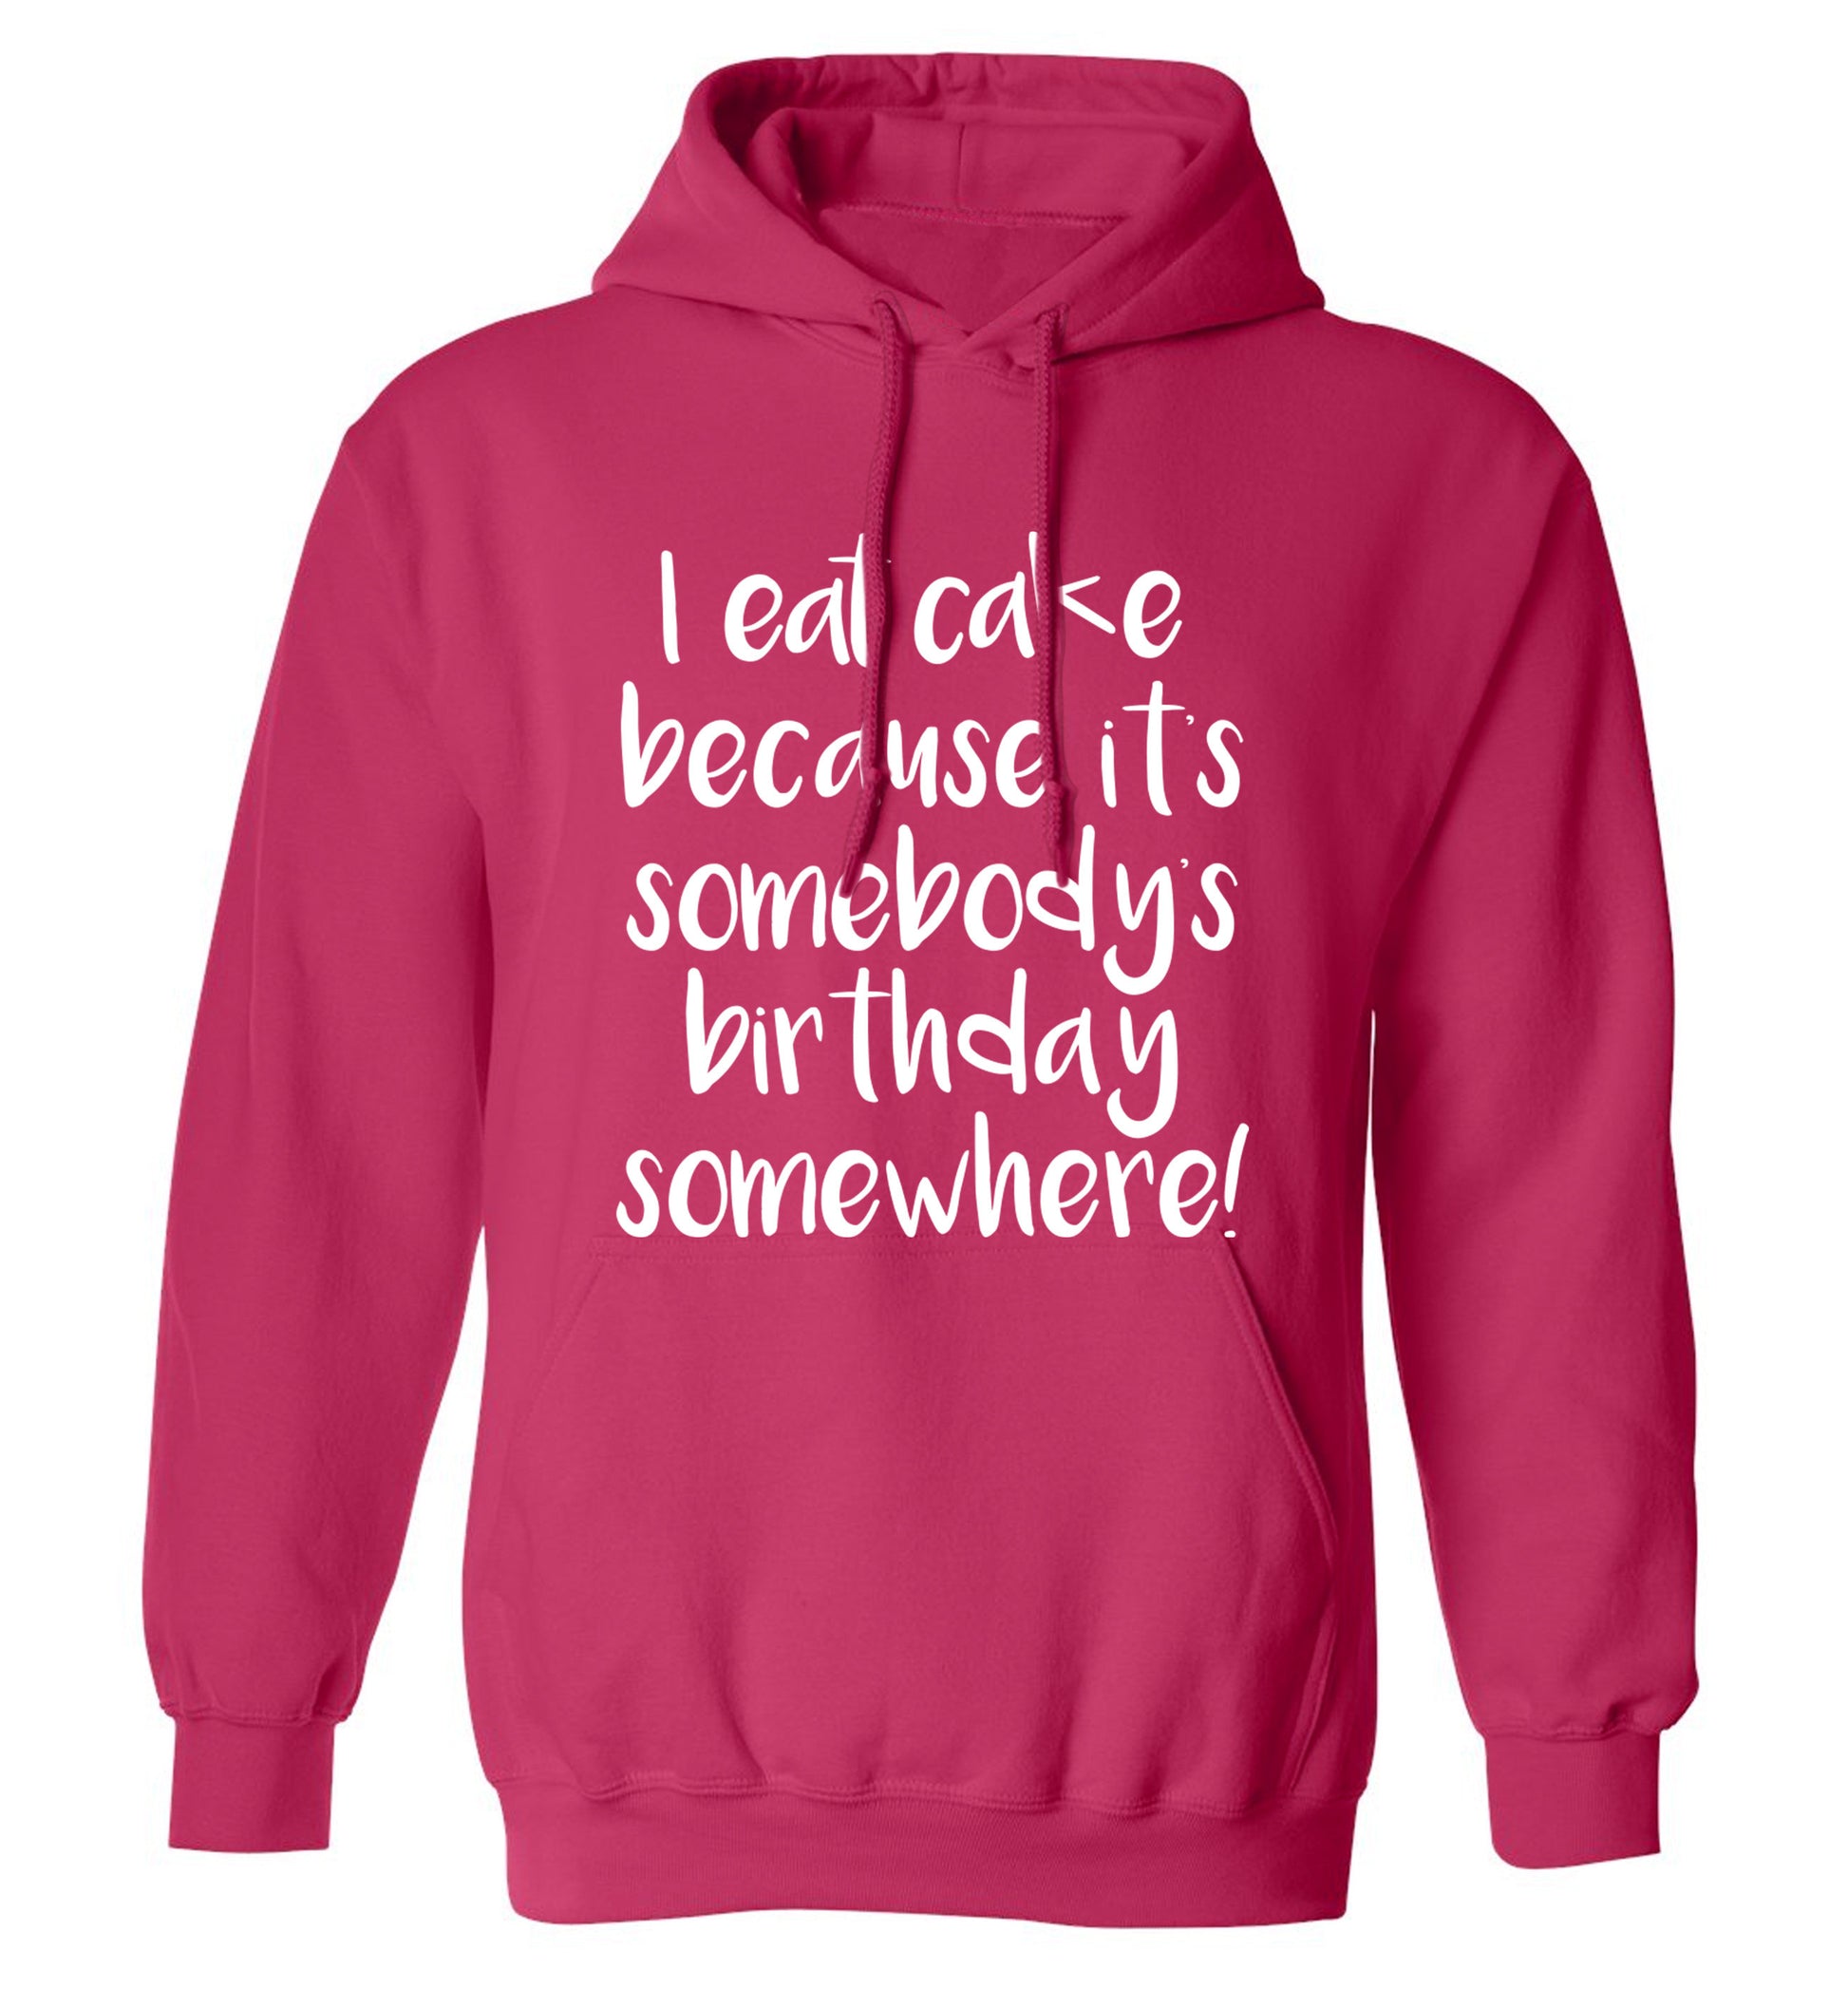 I eat cake because it's somebody's birthday somewhere! adults unisex pink hoodie 2XL